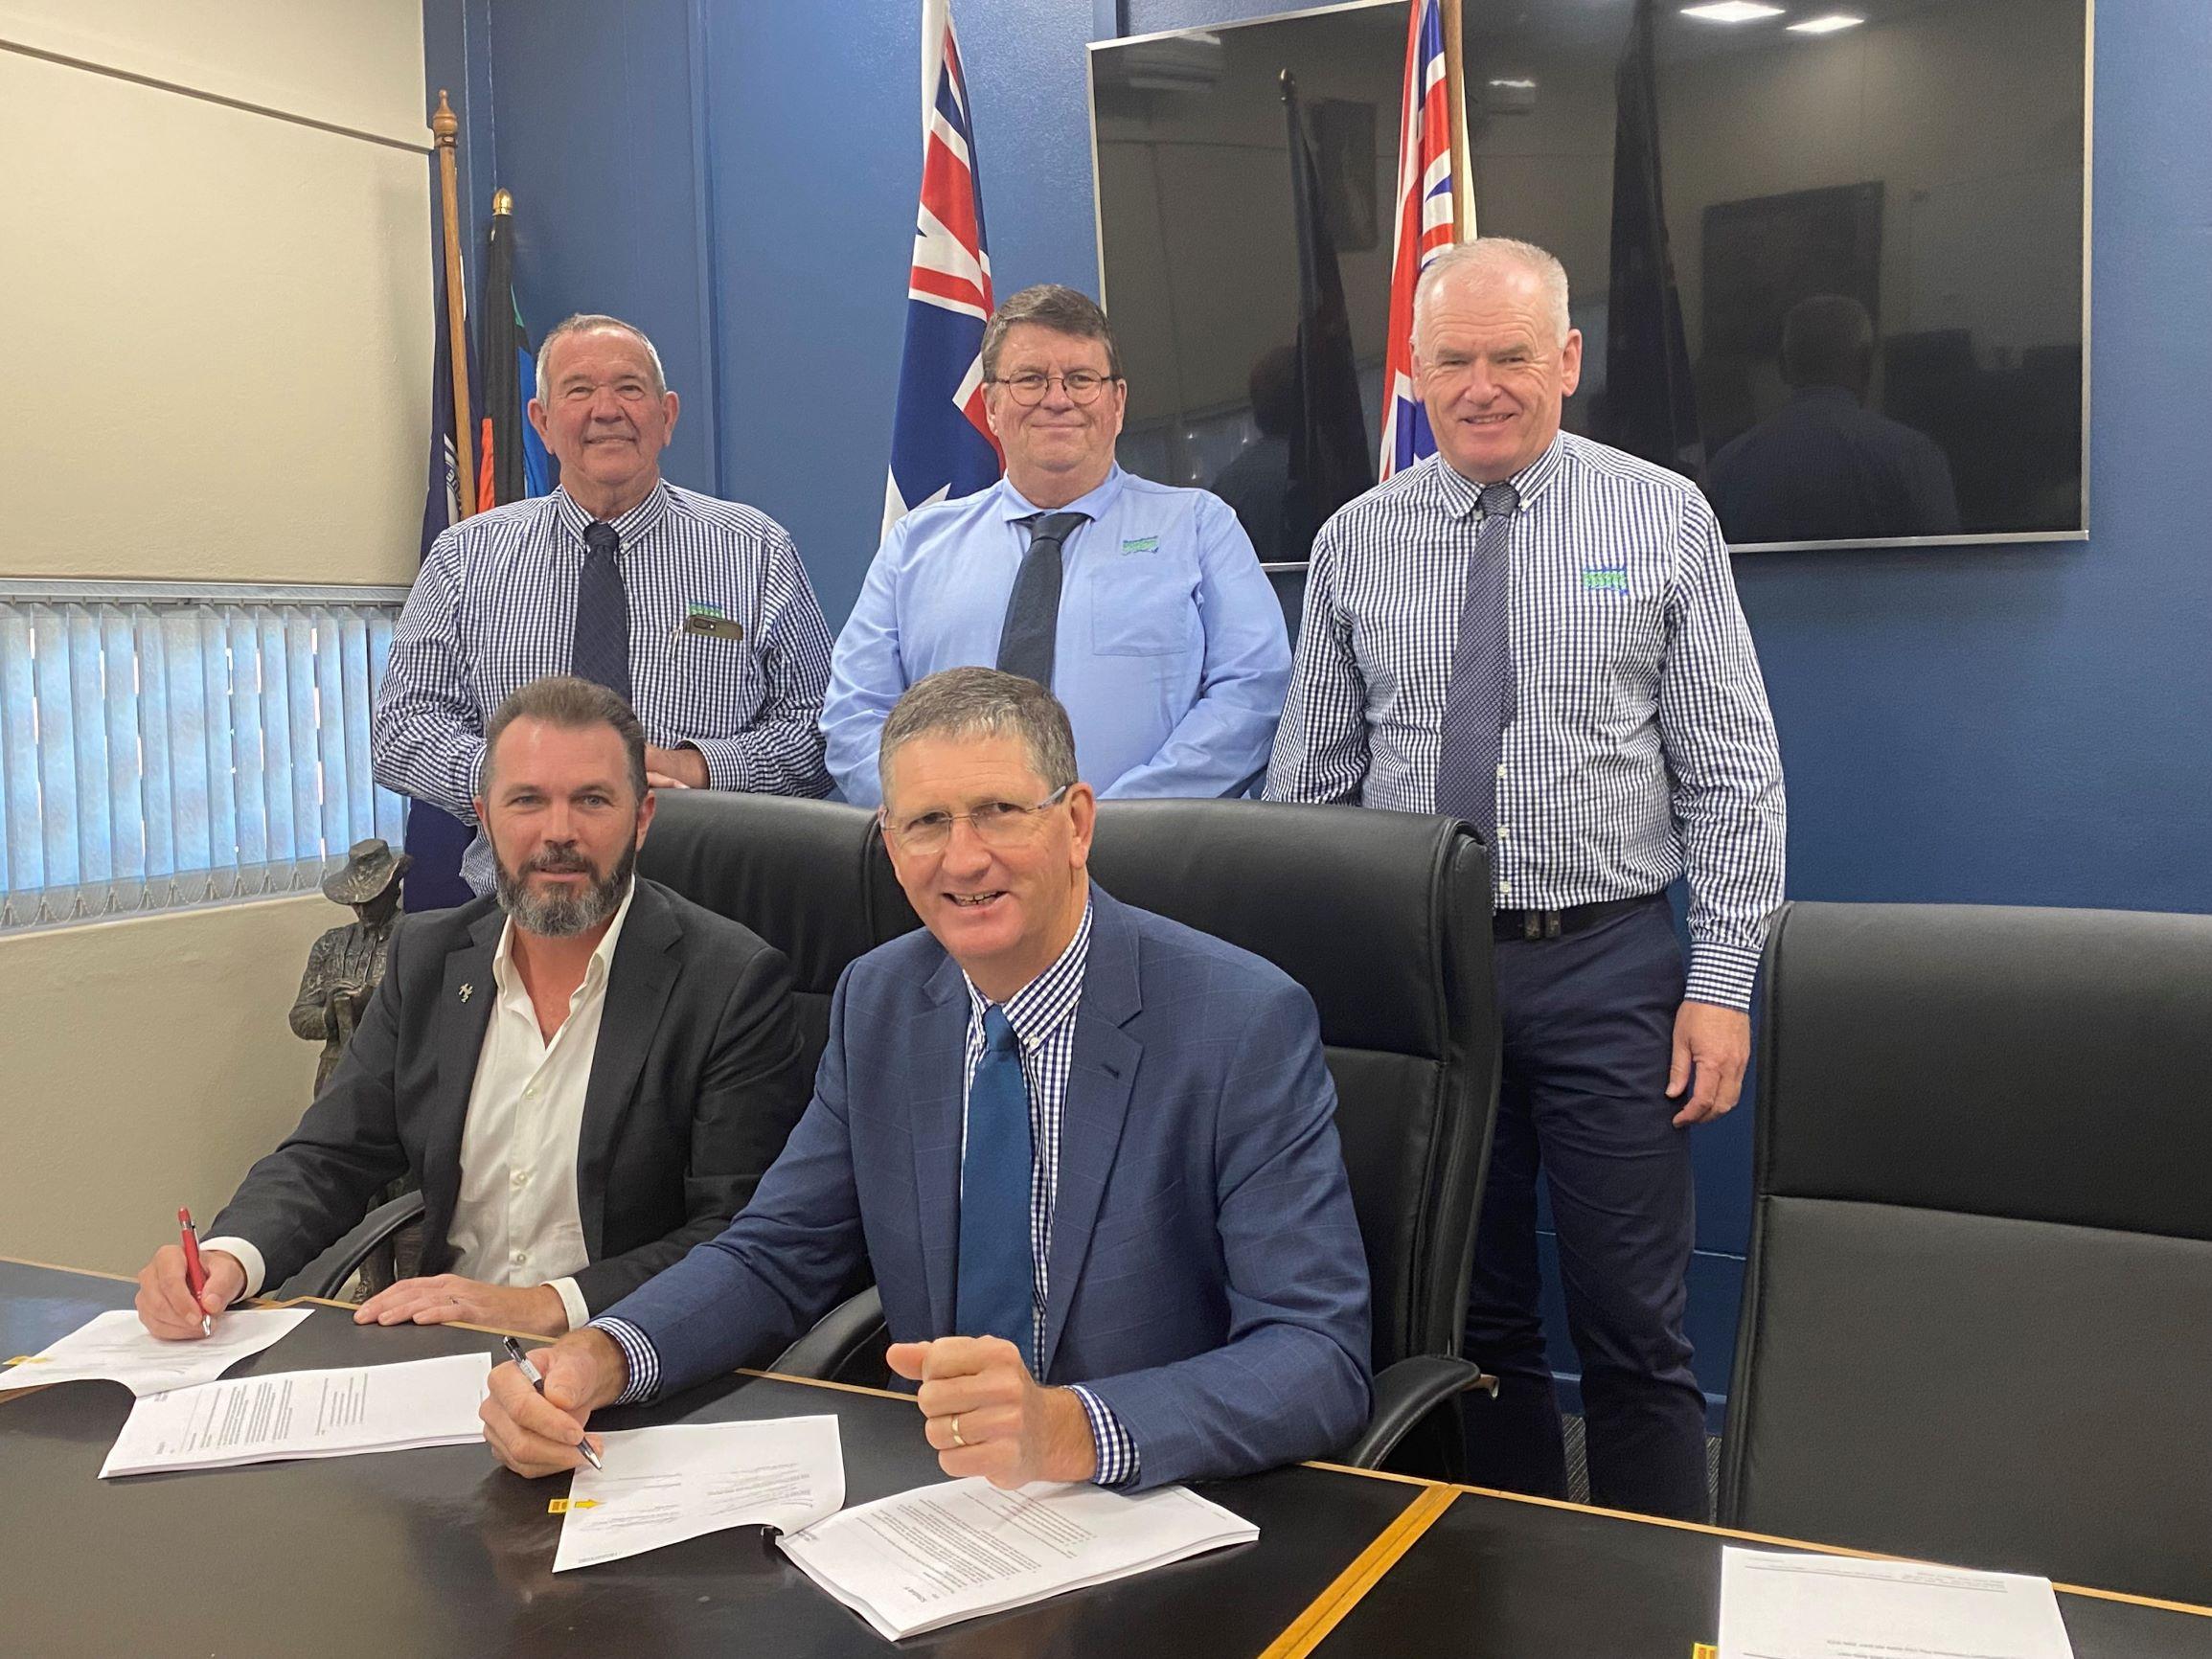 Back: Cr Rick Kearney, Manager Water & Sewerage Trevor Seth, CEO Carl Manton
Front: Simon Shaw Managing Director The Hydrogen Collective and Hon. Cr Lawrence Springborg AM